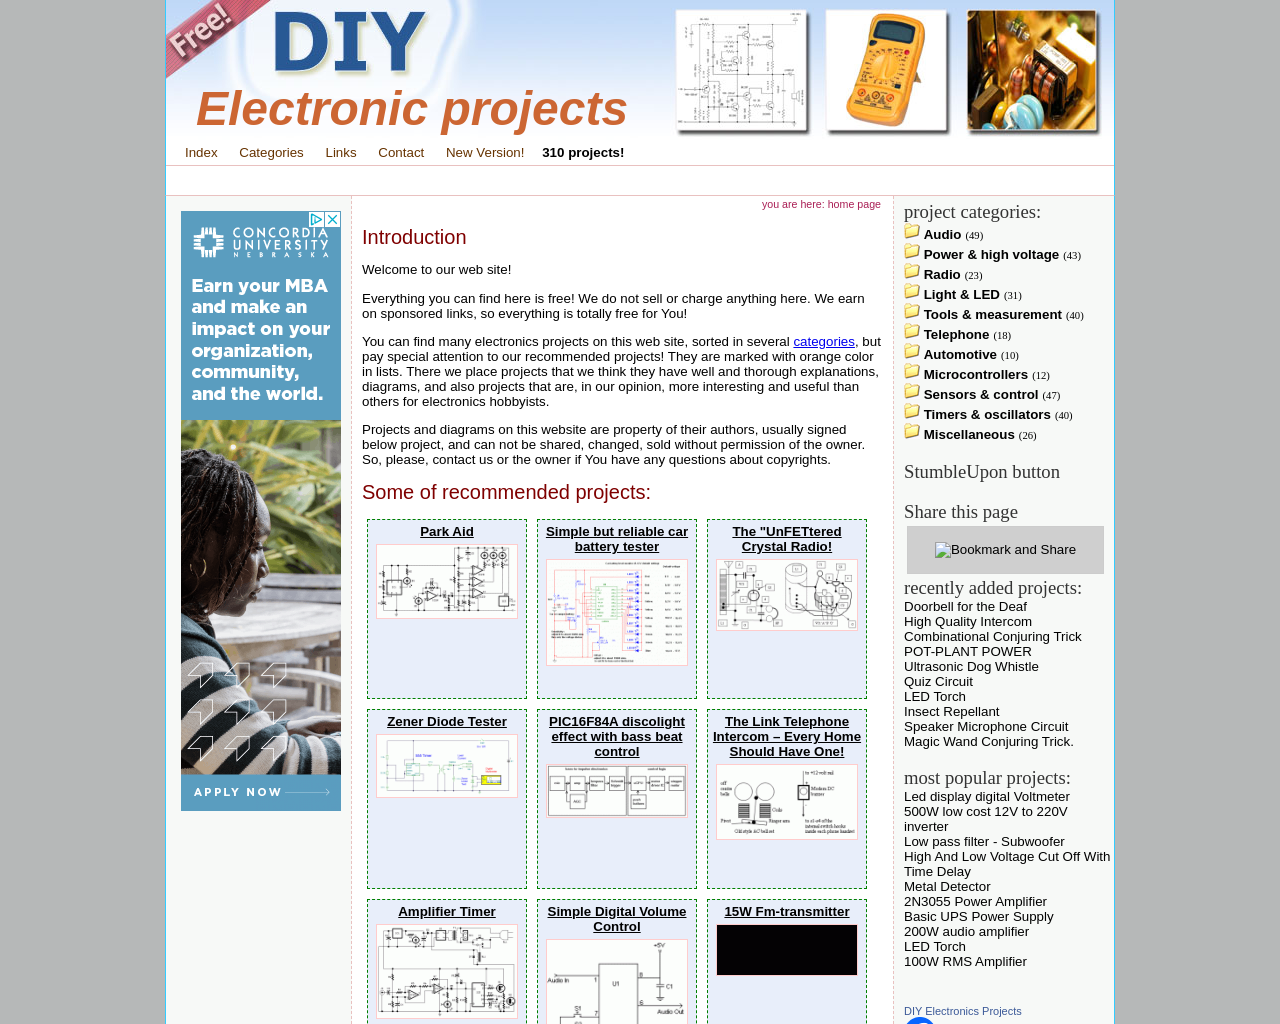 diy-electronic-projects.com